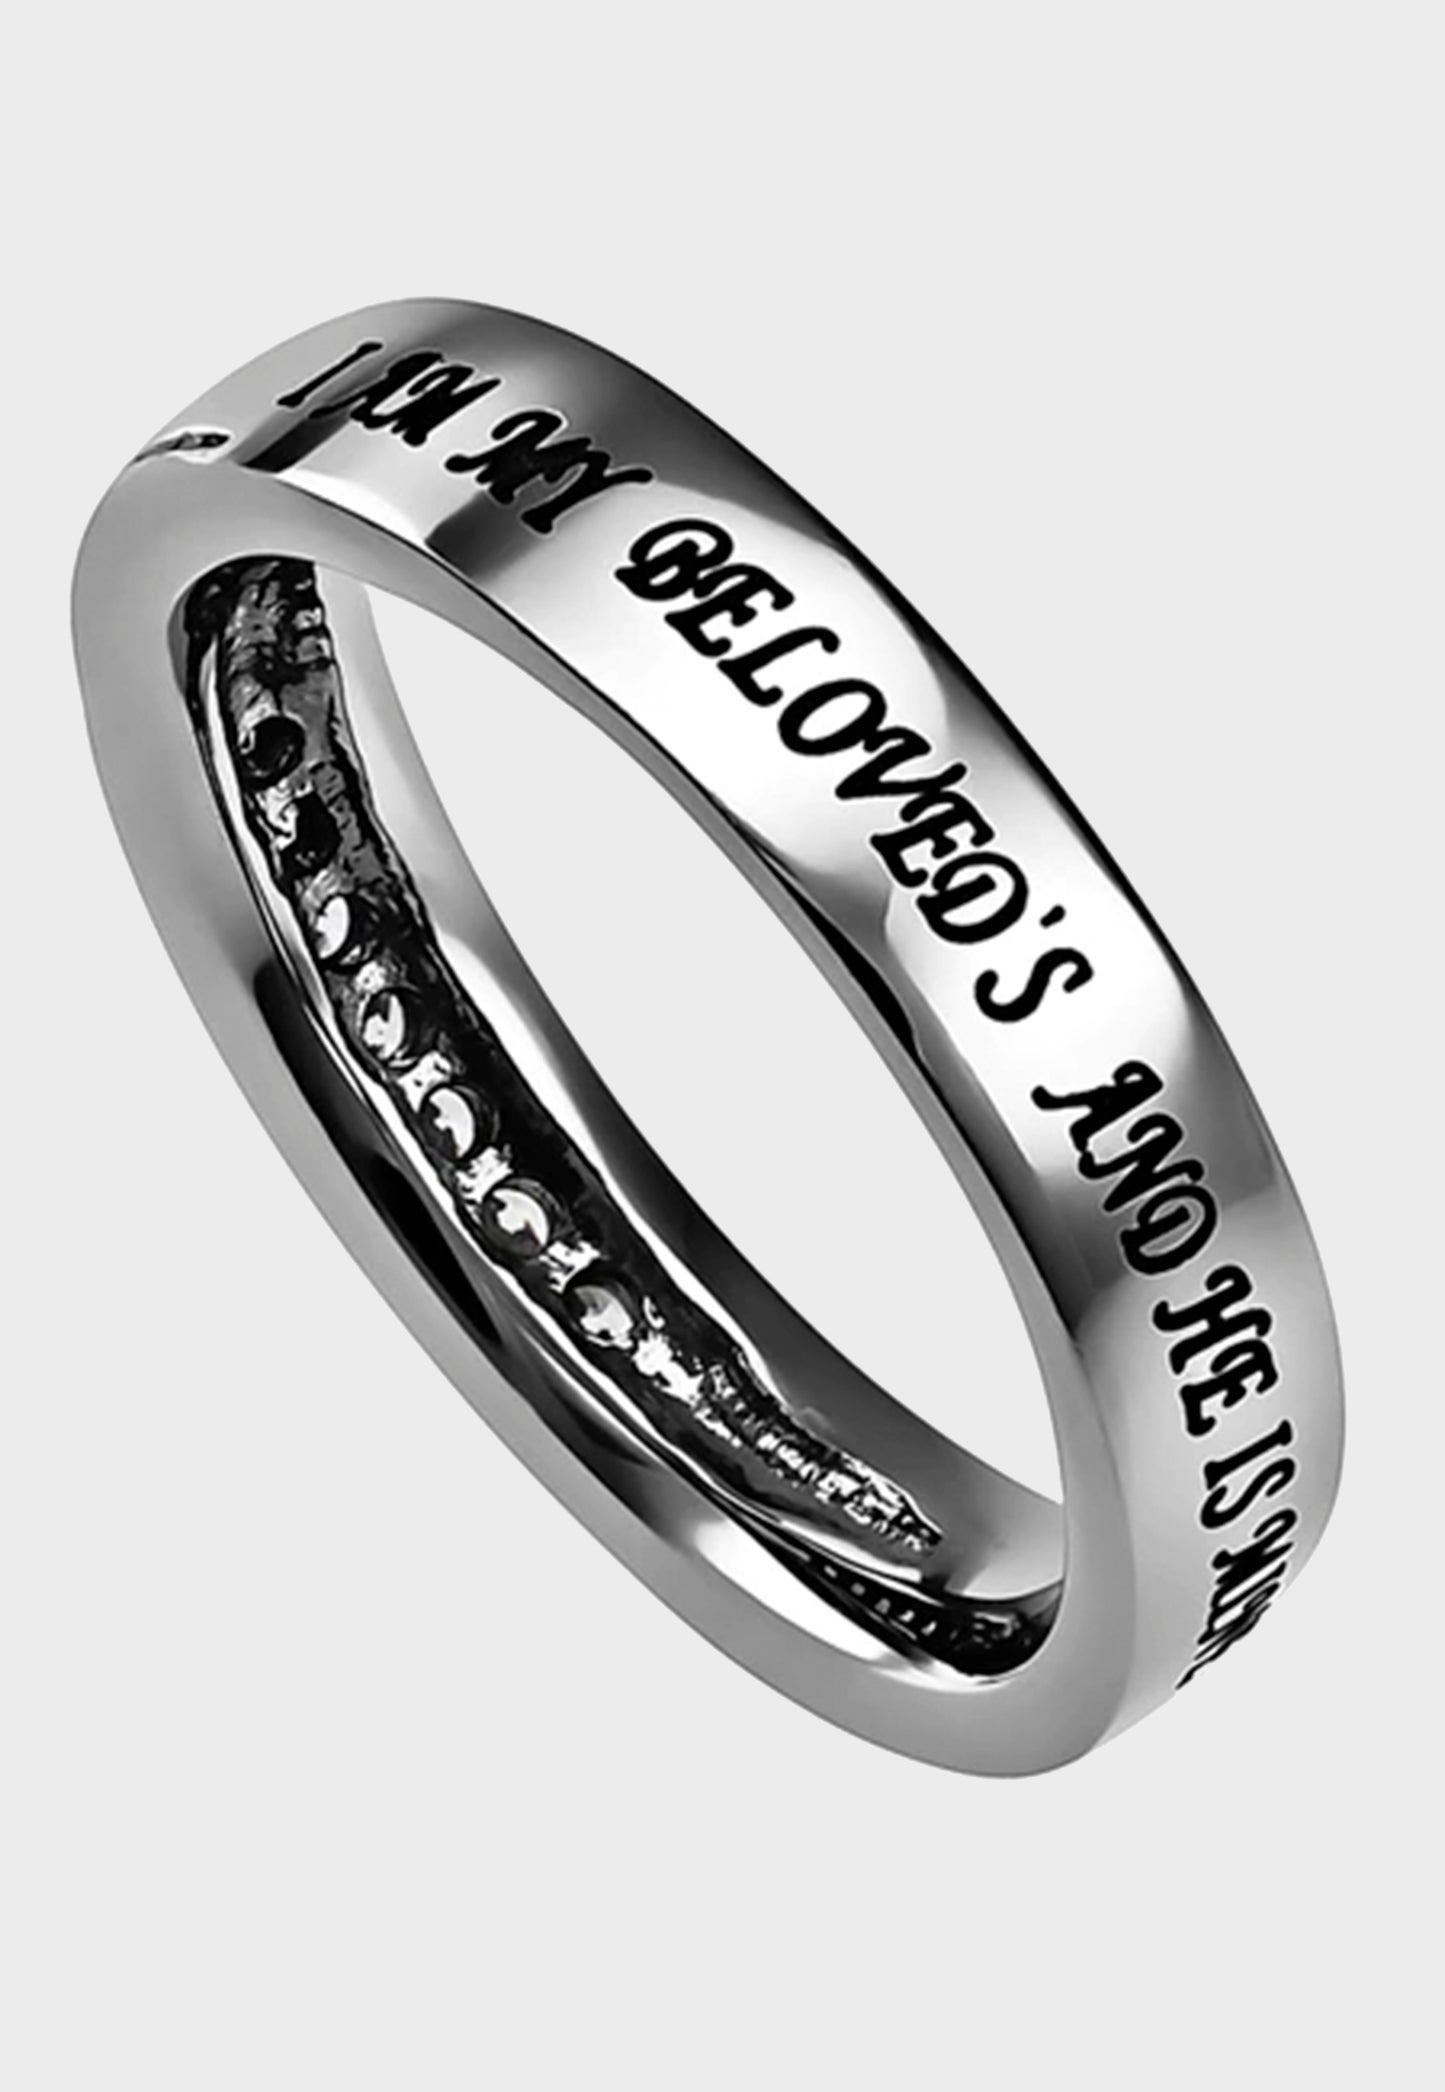 Ladies Christian ring with inlays and Bible verse